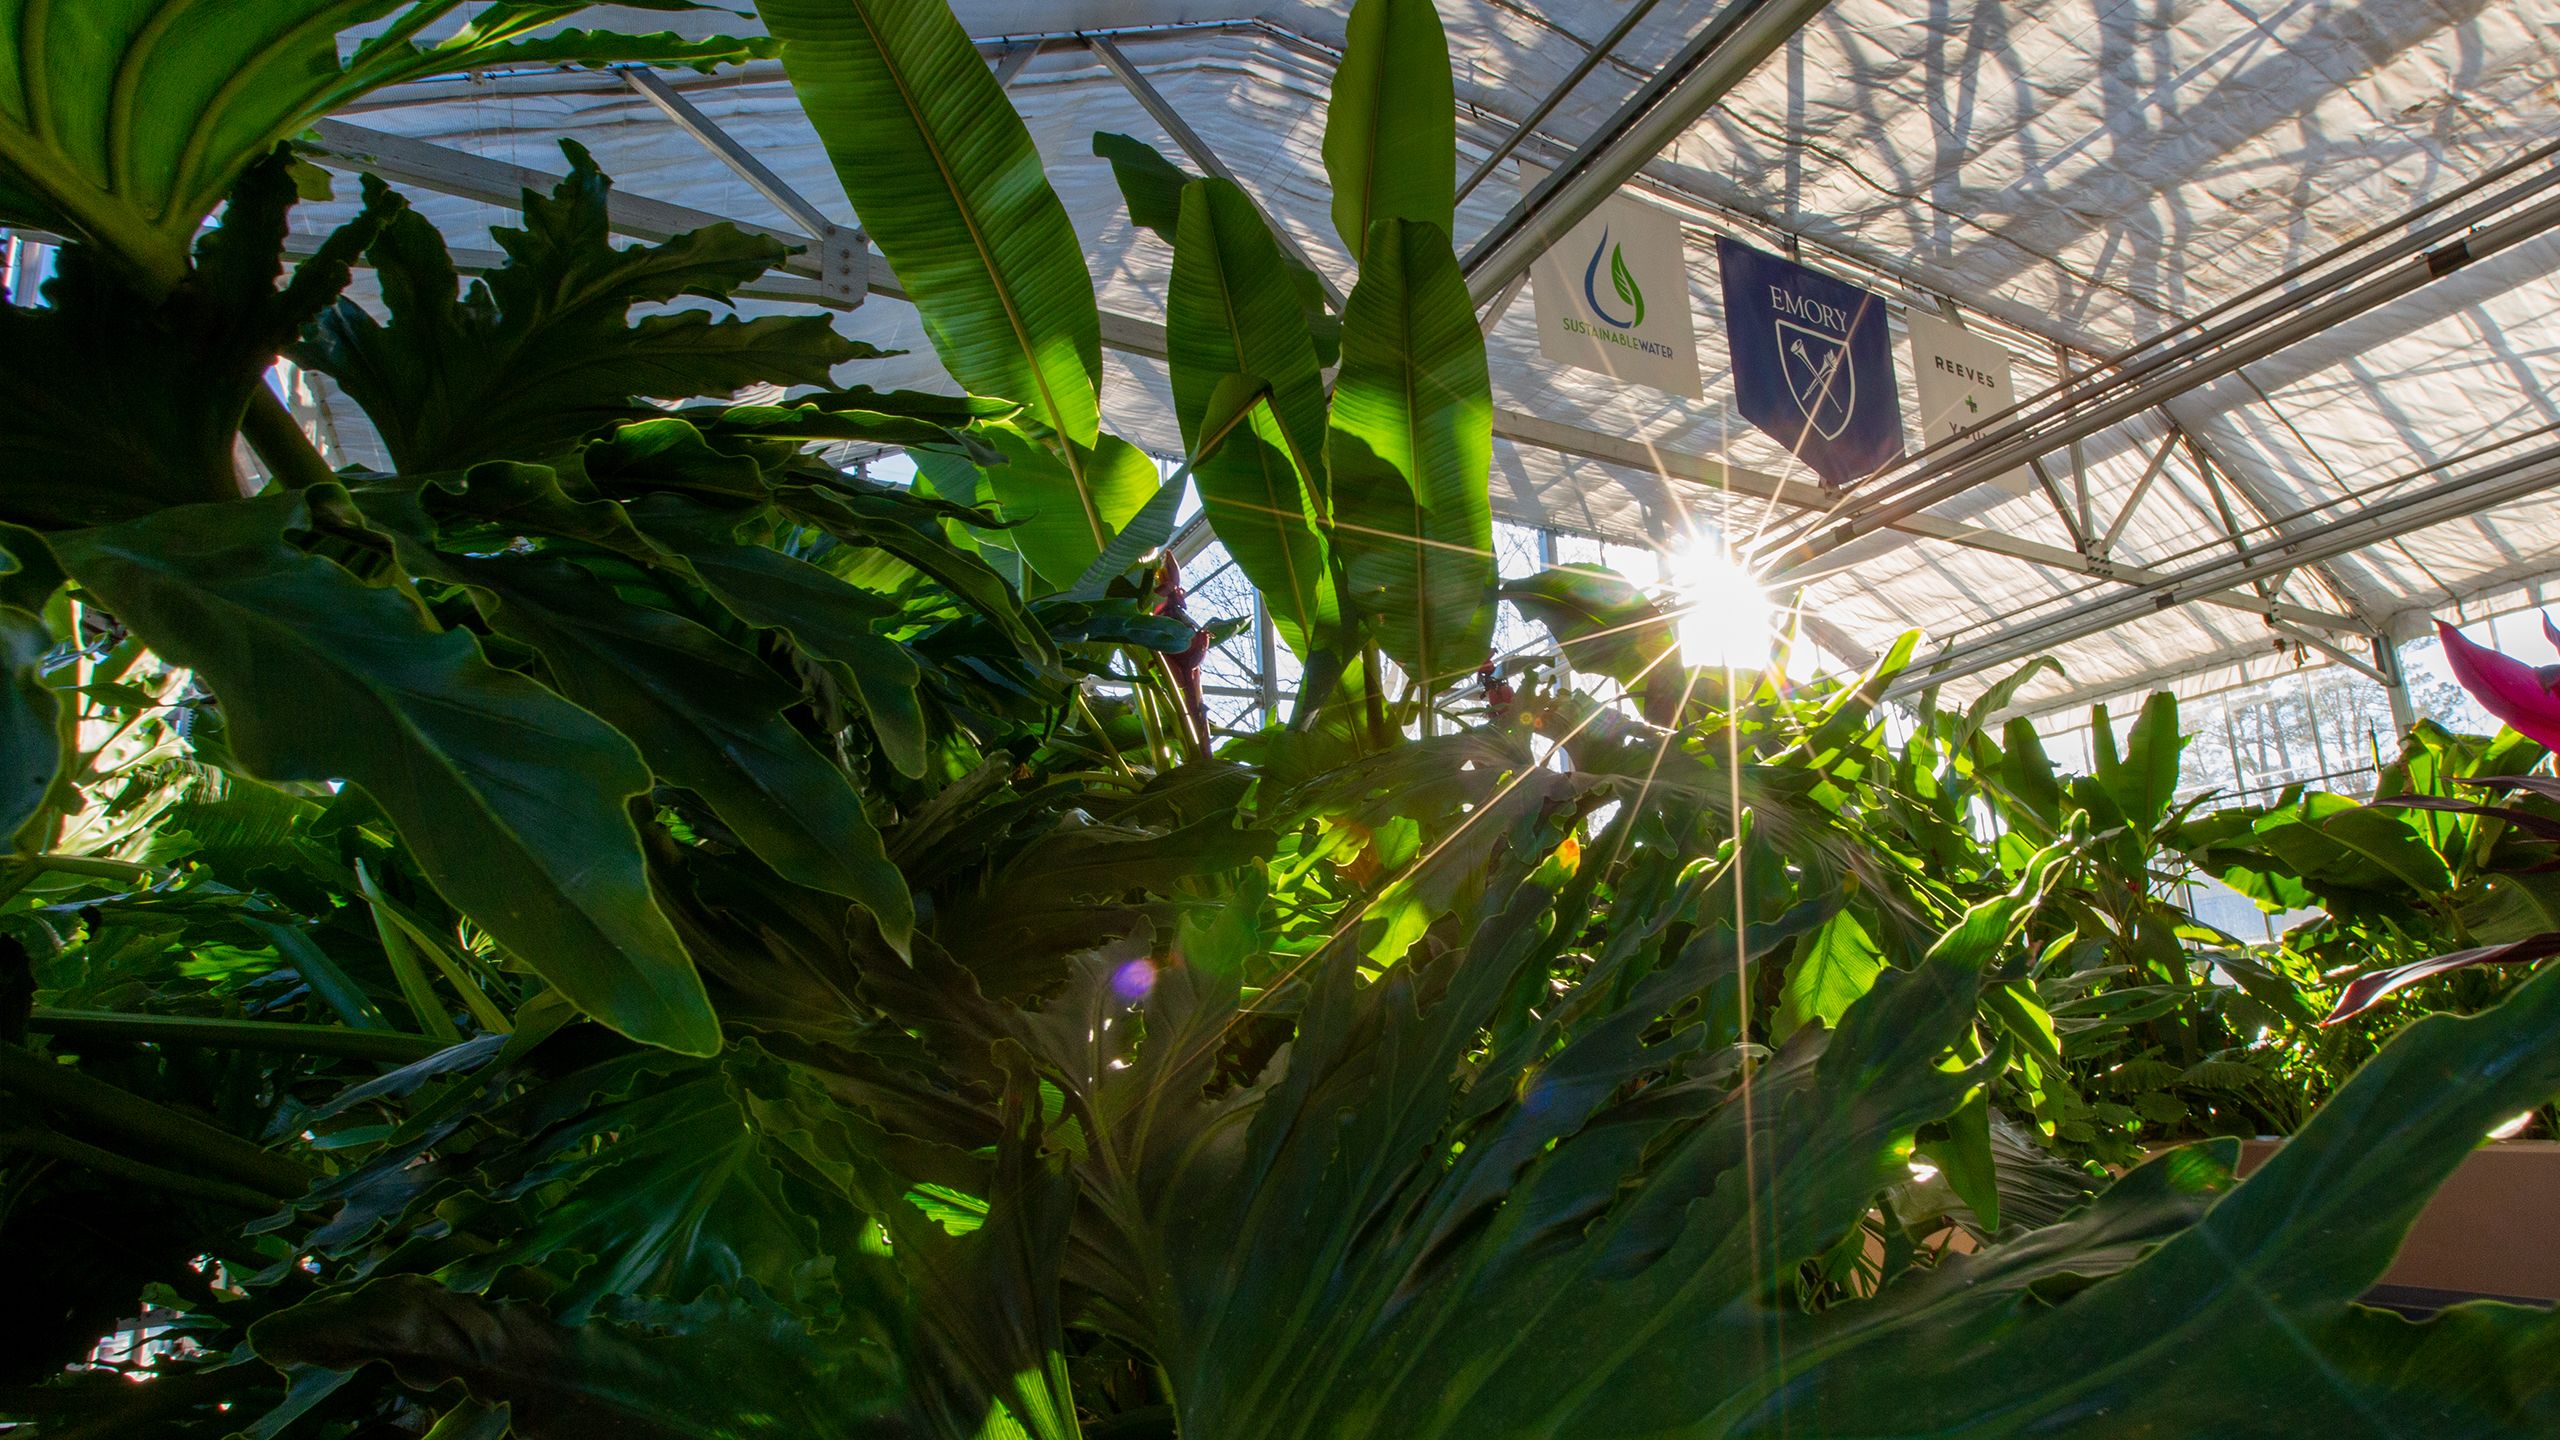 interior of Emory water hub greenhouse with plants and sunshine